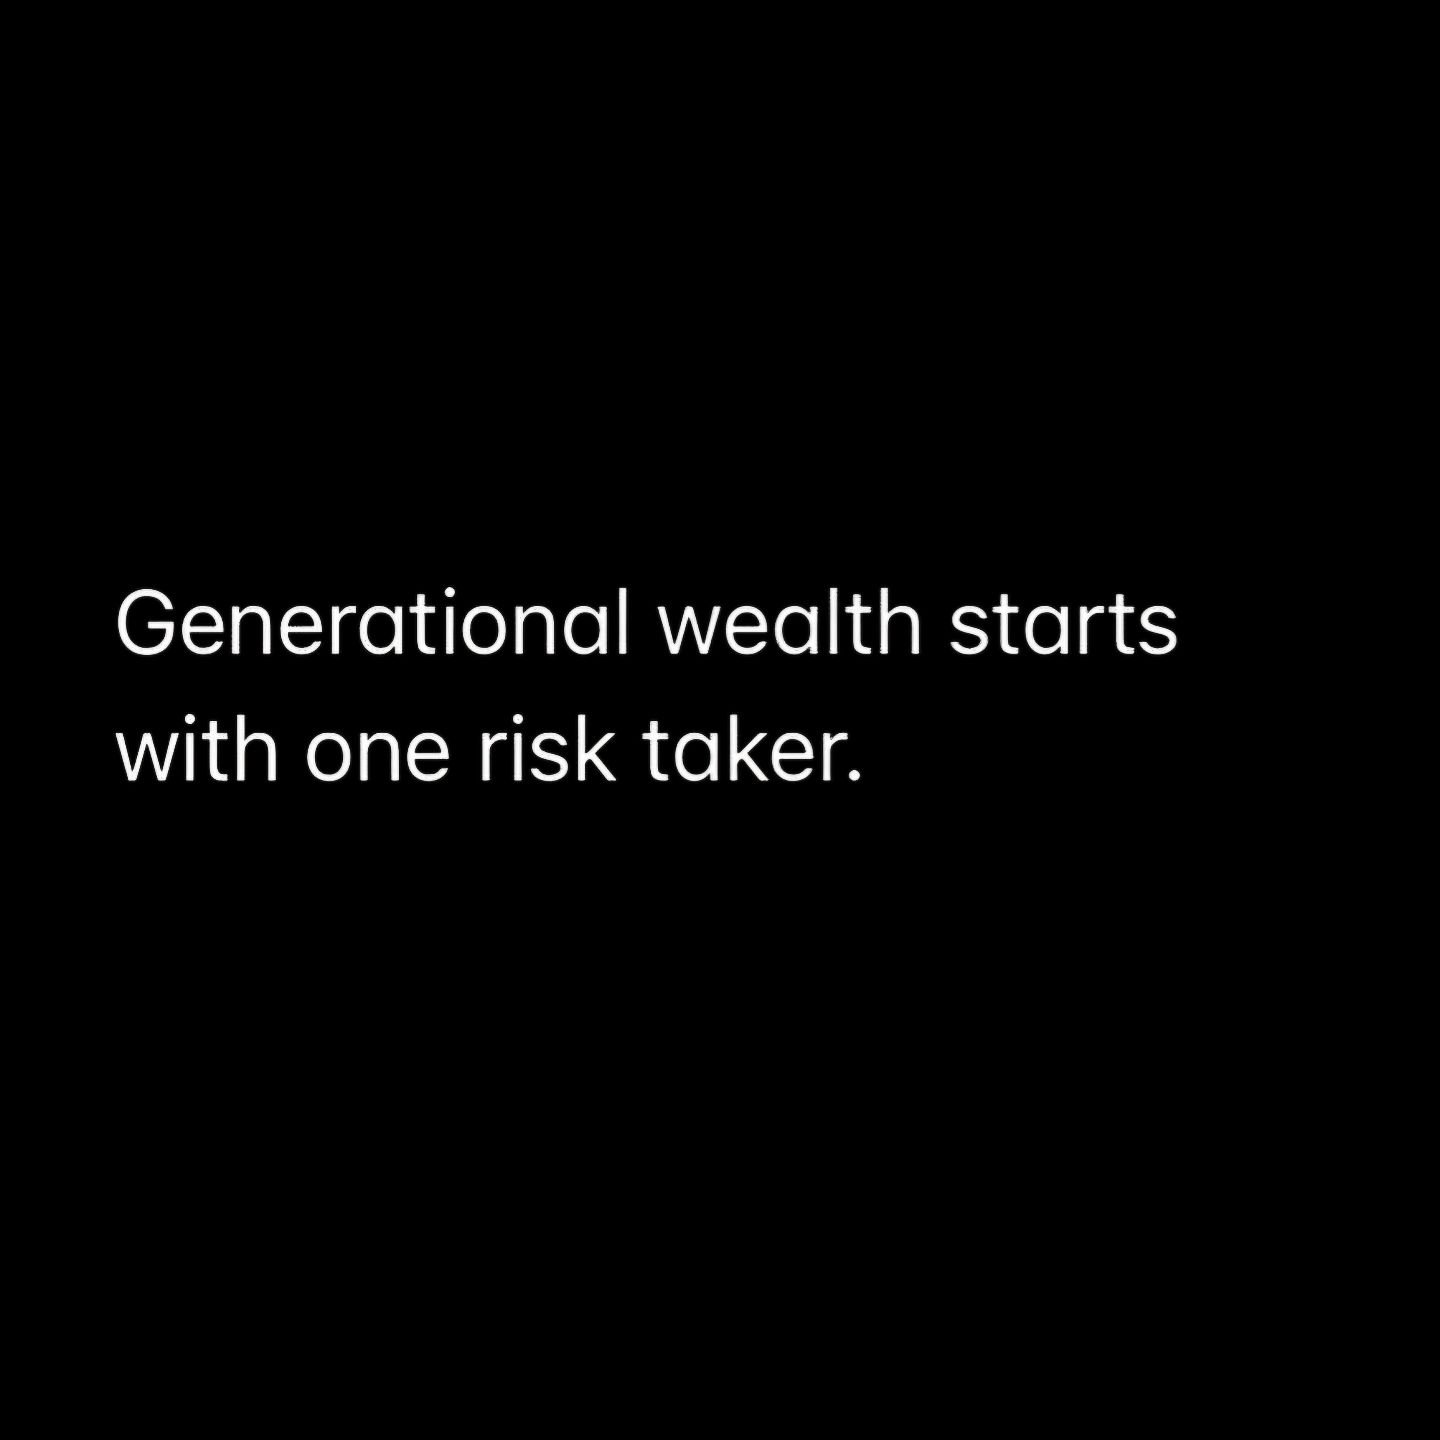 &quot;Generational wealth starts with one risk taker.&quot;

rp @thegrowinginvestor